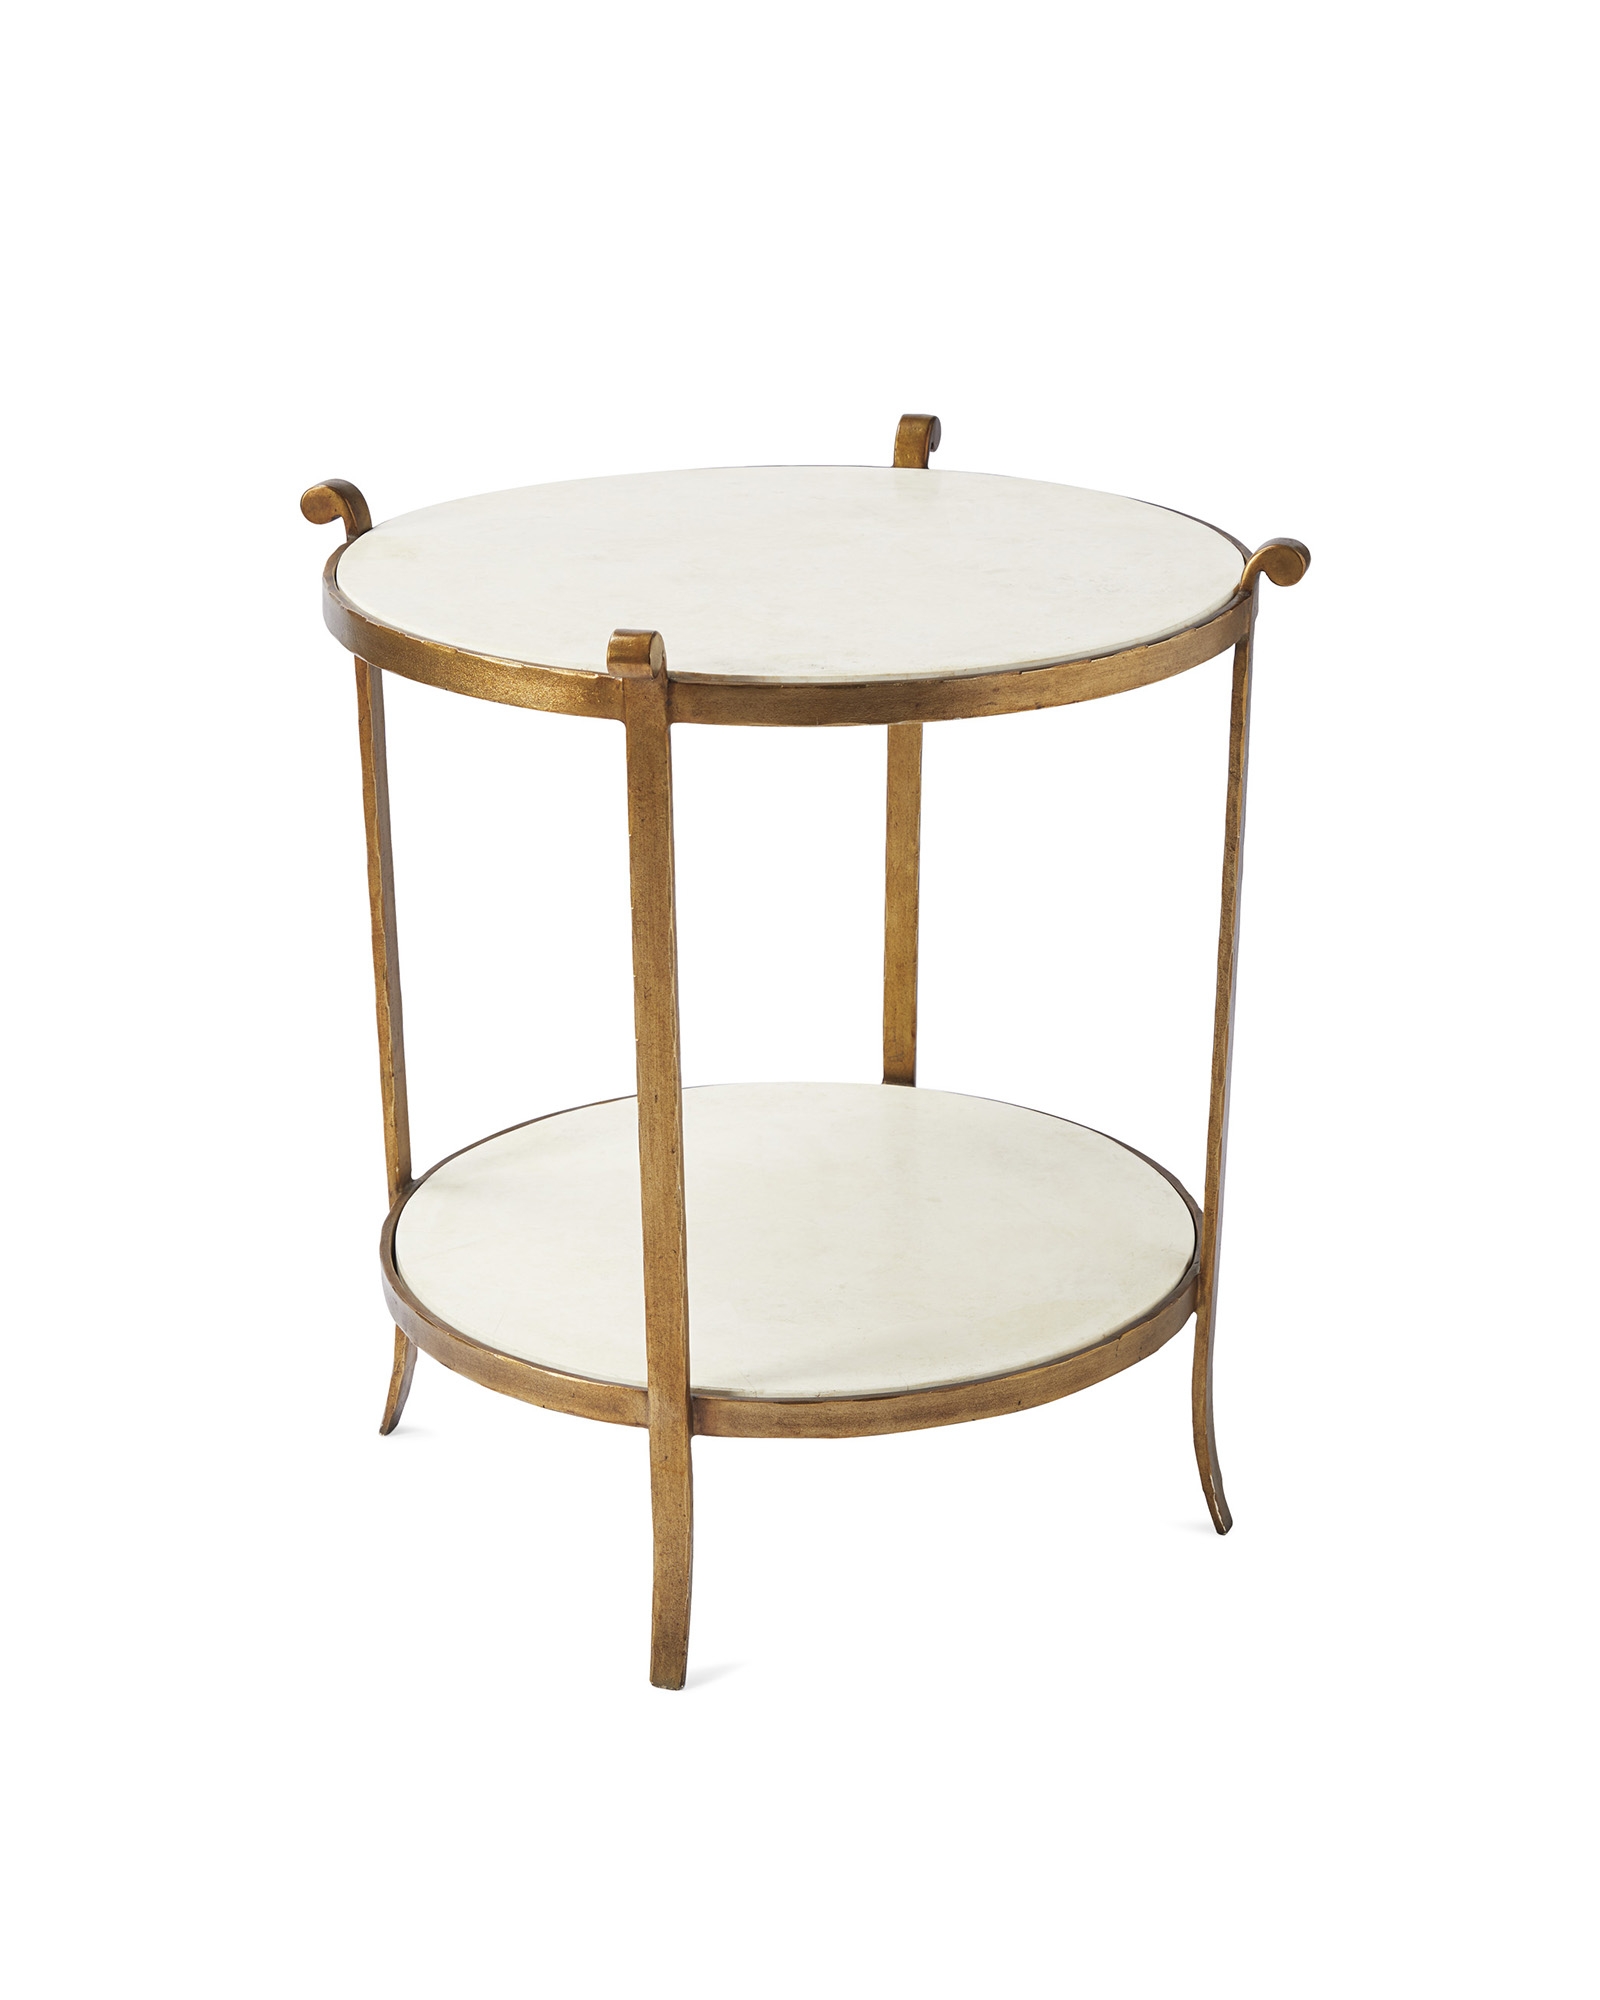 St. Germain Round Side Table - Image 0